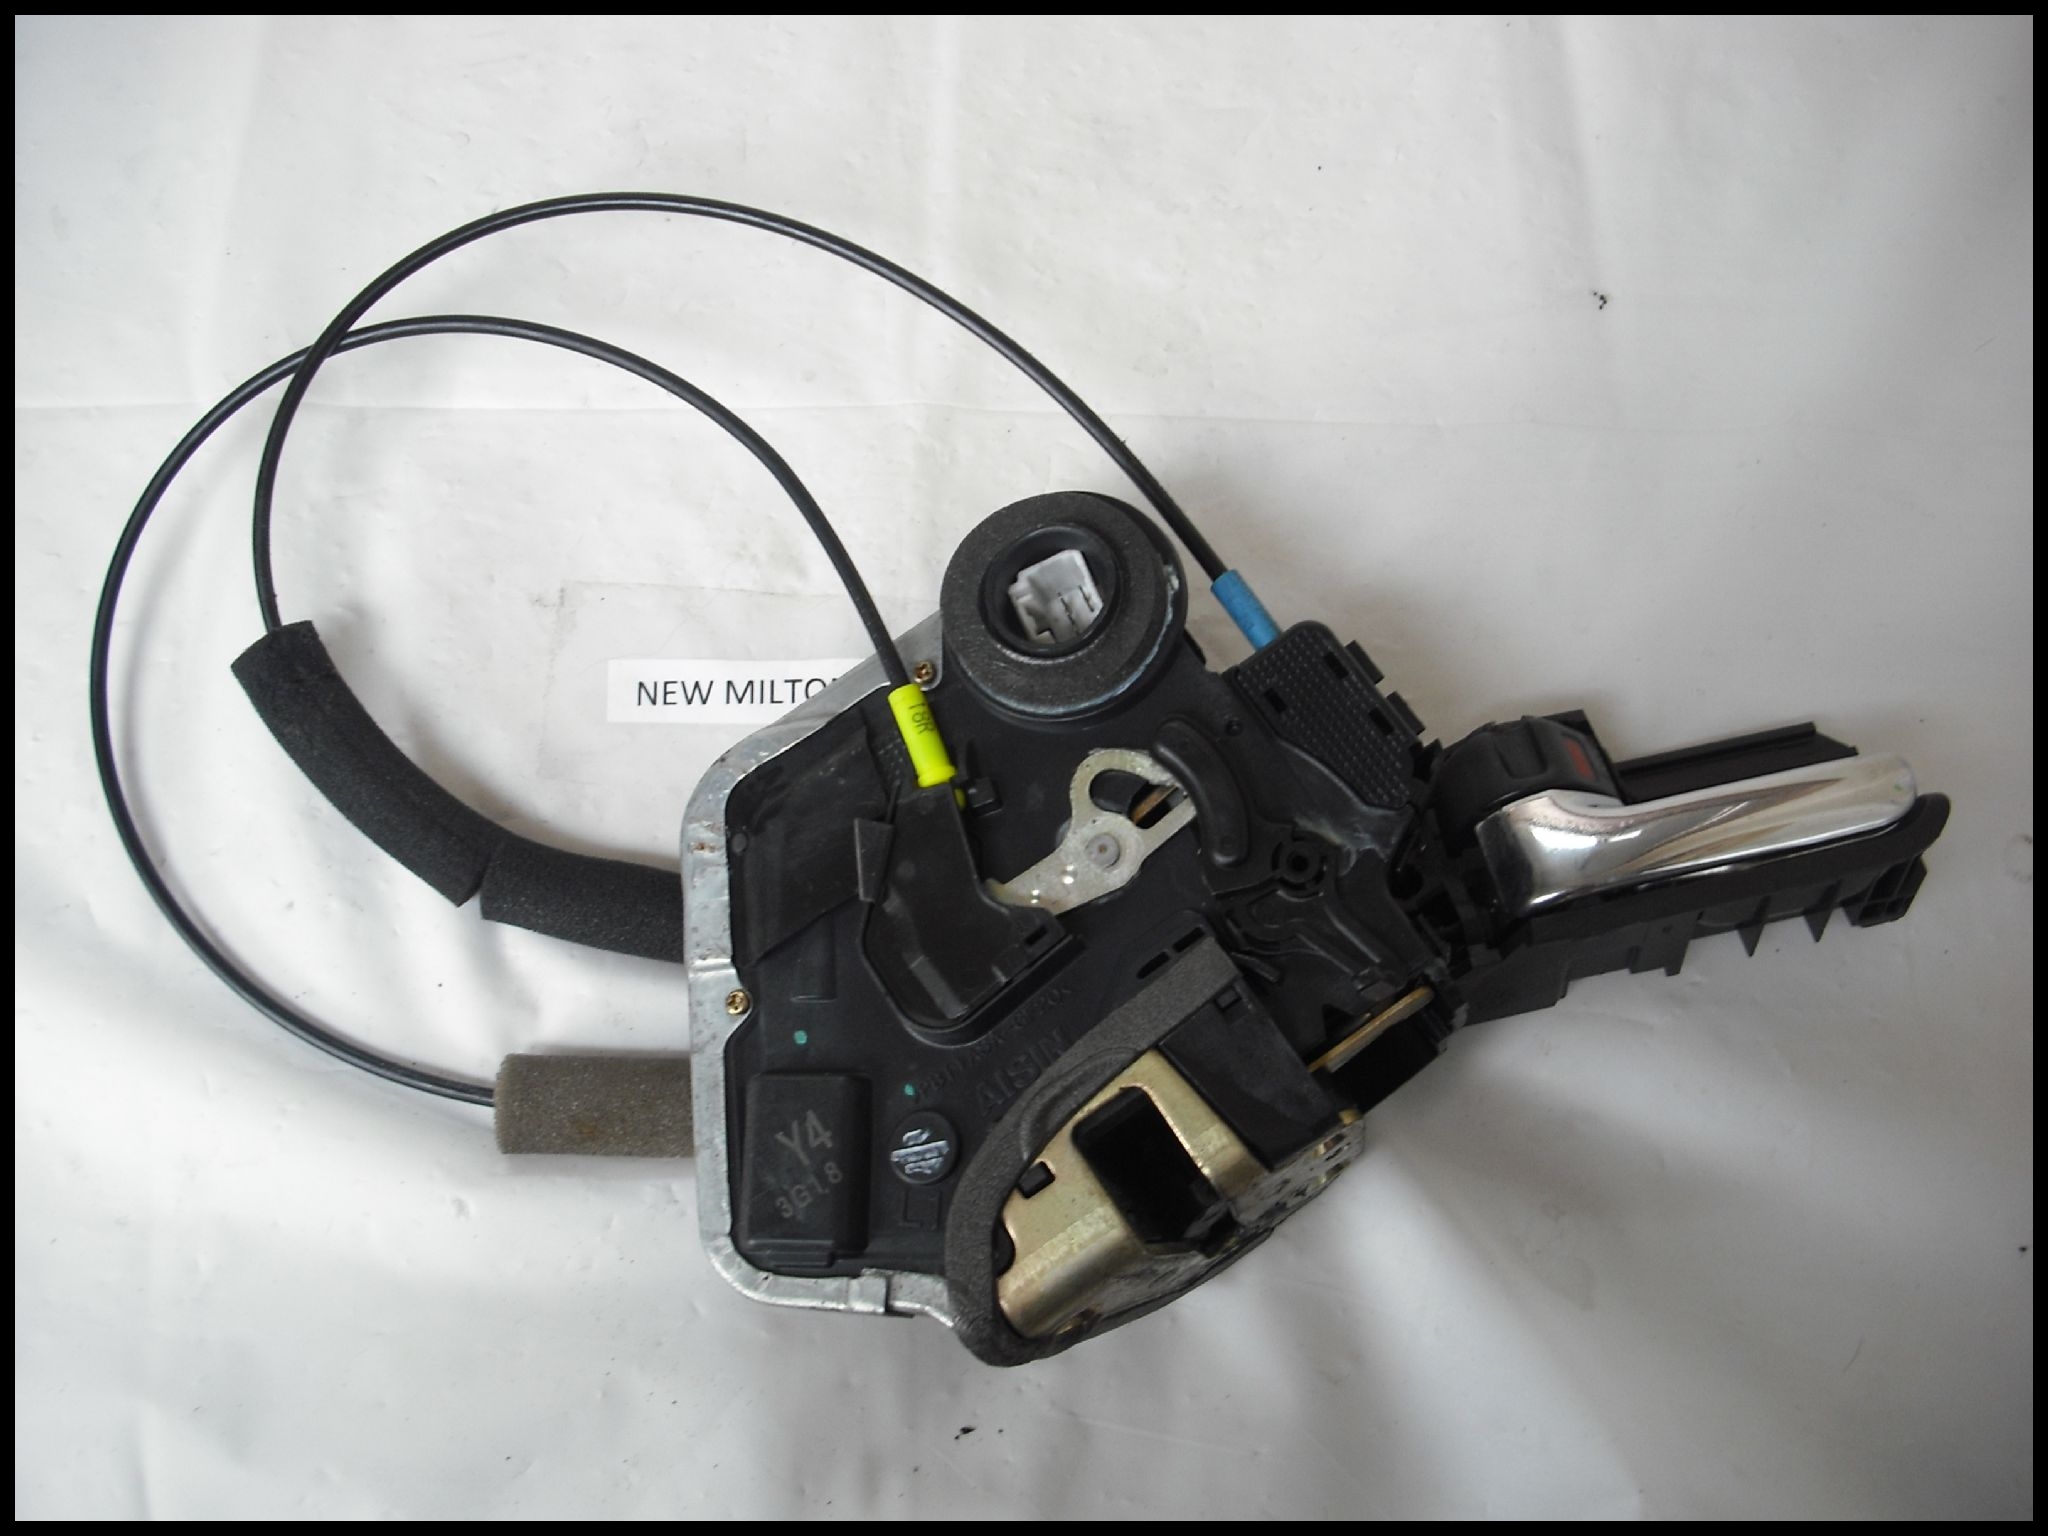 TOYOTA AVENSIS MK2 REAR DOOR CATCH WITH CENTRAL LOCKING ACTUATOR N S LEFT